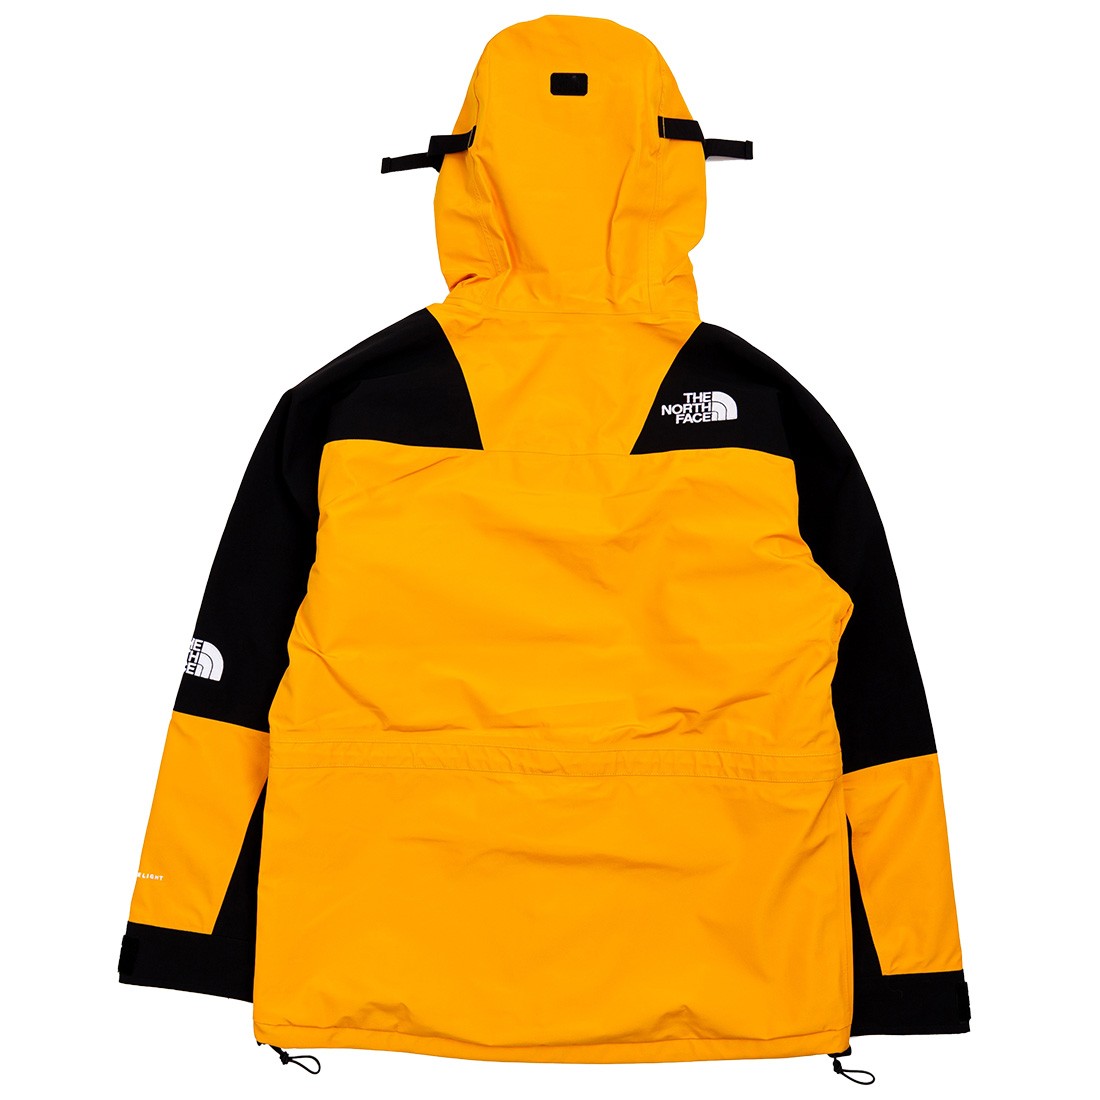 THE NORTH FACE: jacket for man - Yellow  The North Face jacket NF0A4QYX  online at